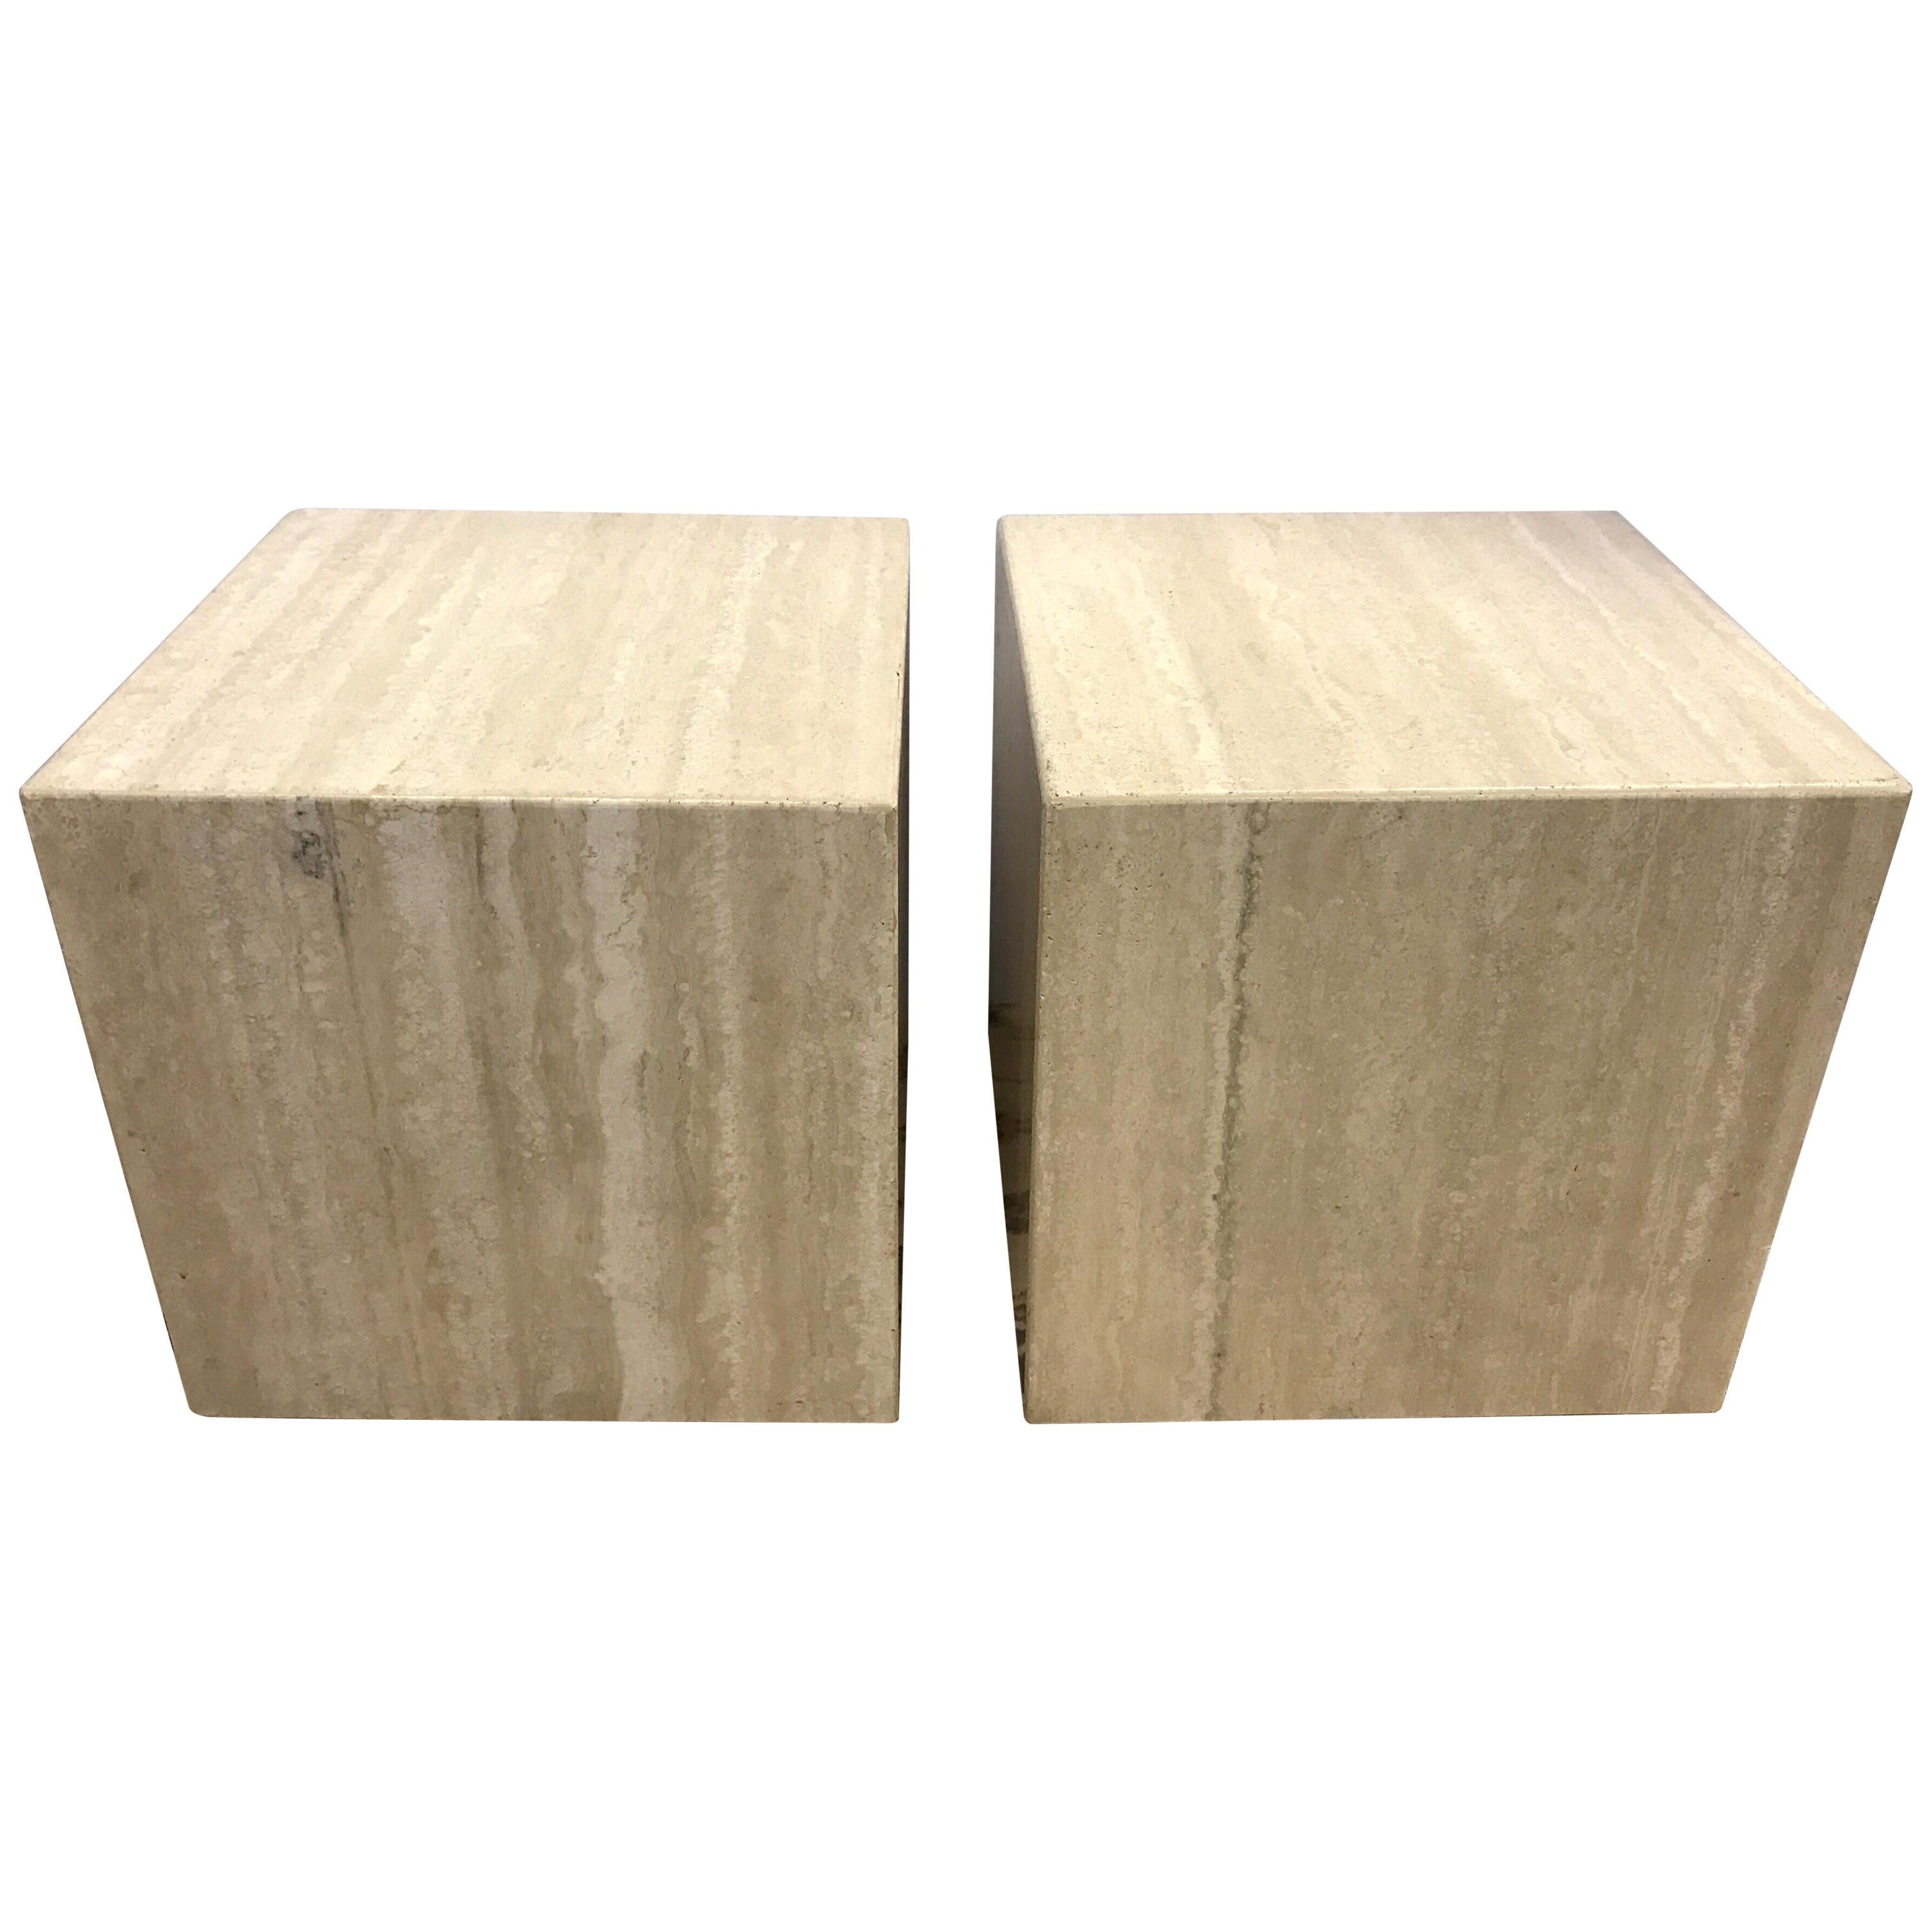 Pair of Midcentury Travertine Cube End Tables Stools Cocktail Table Italy